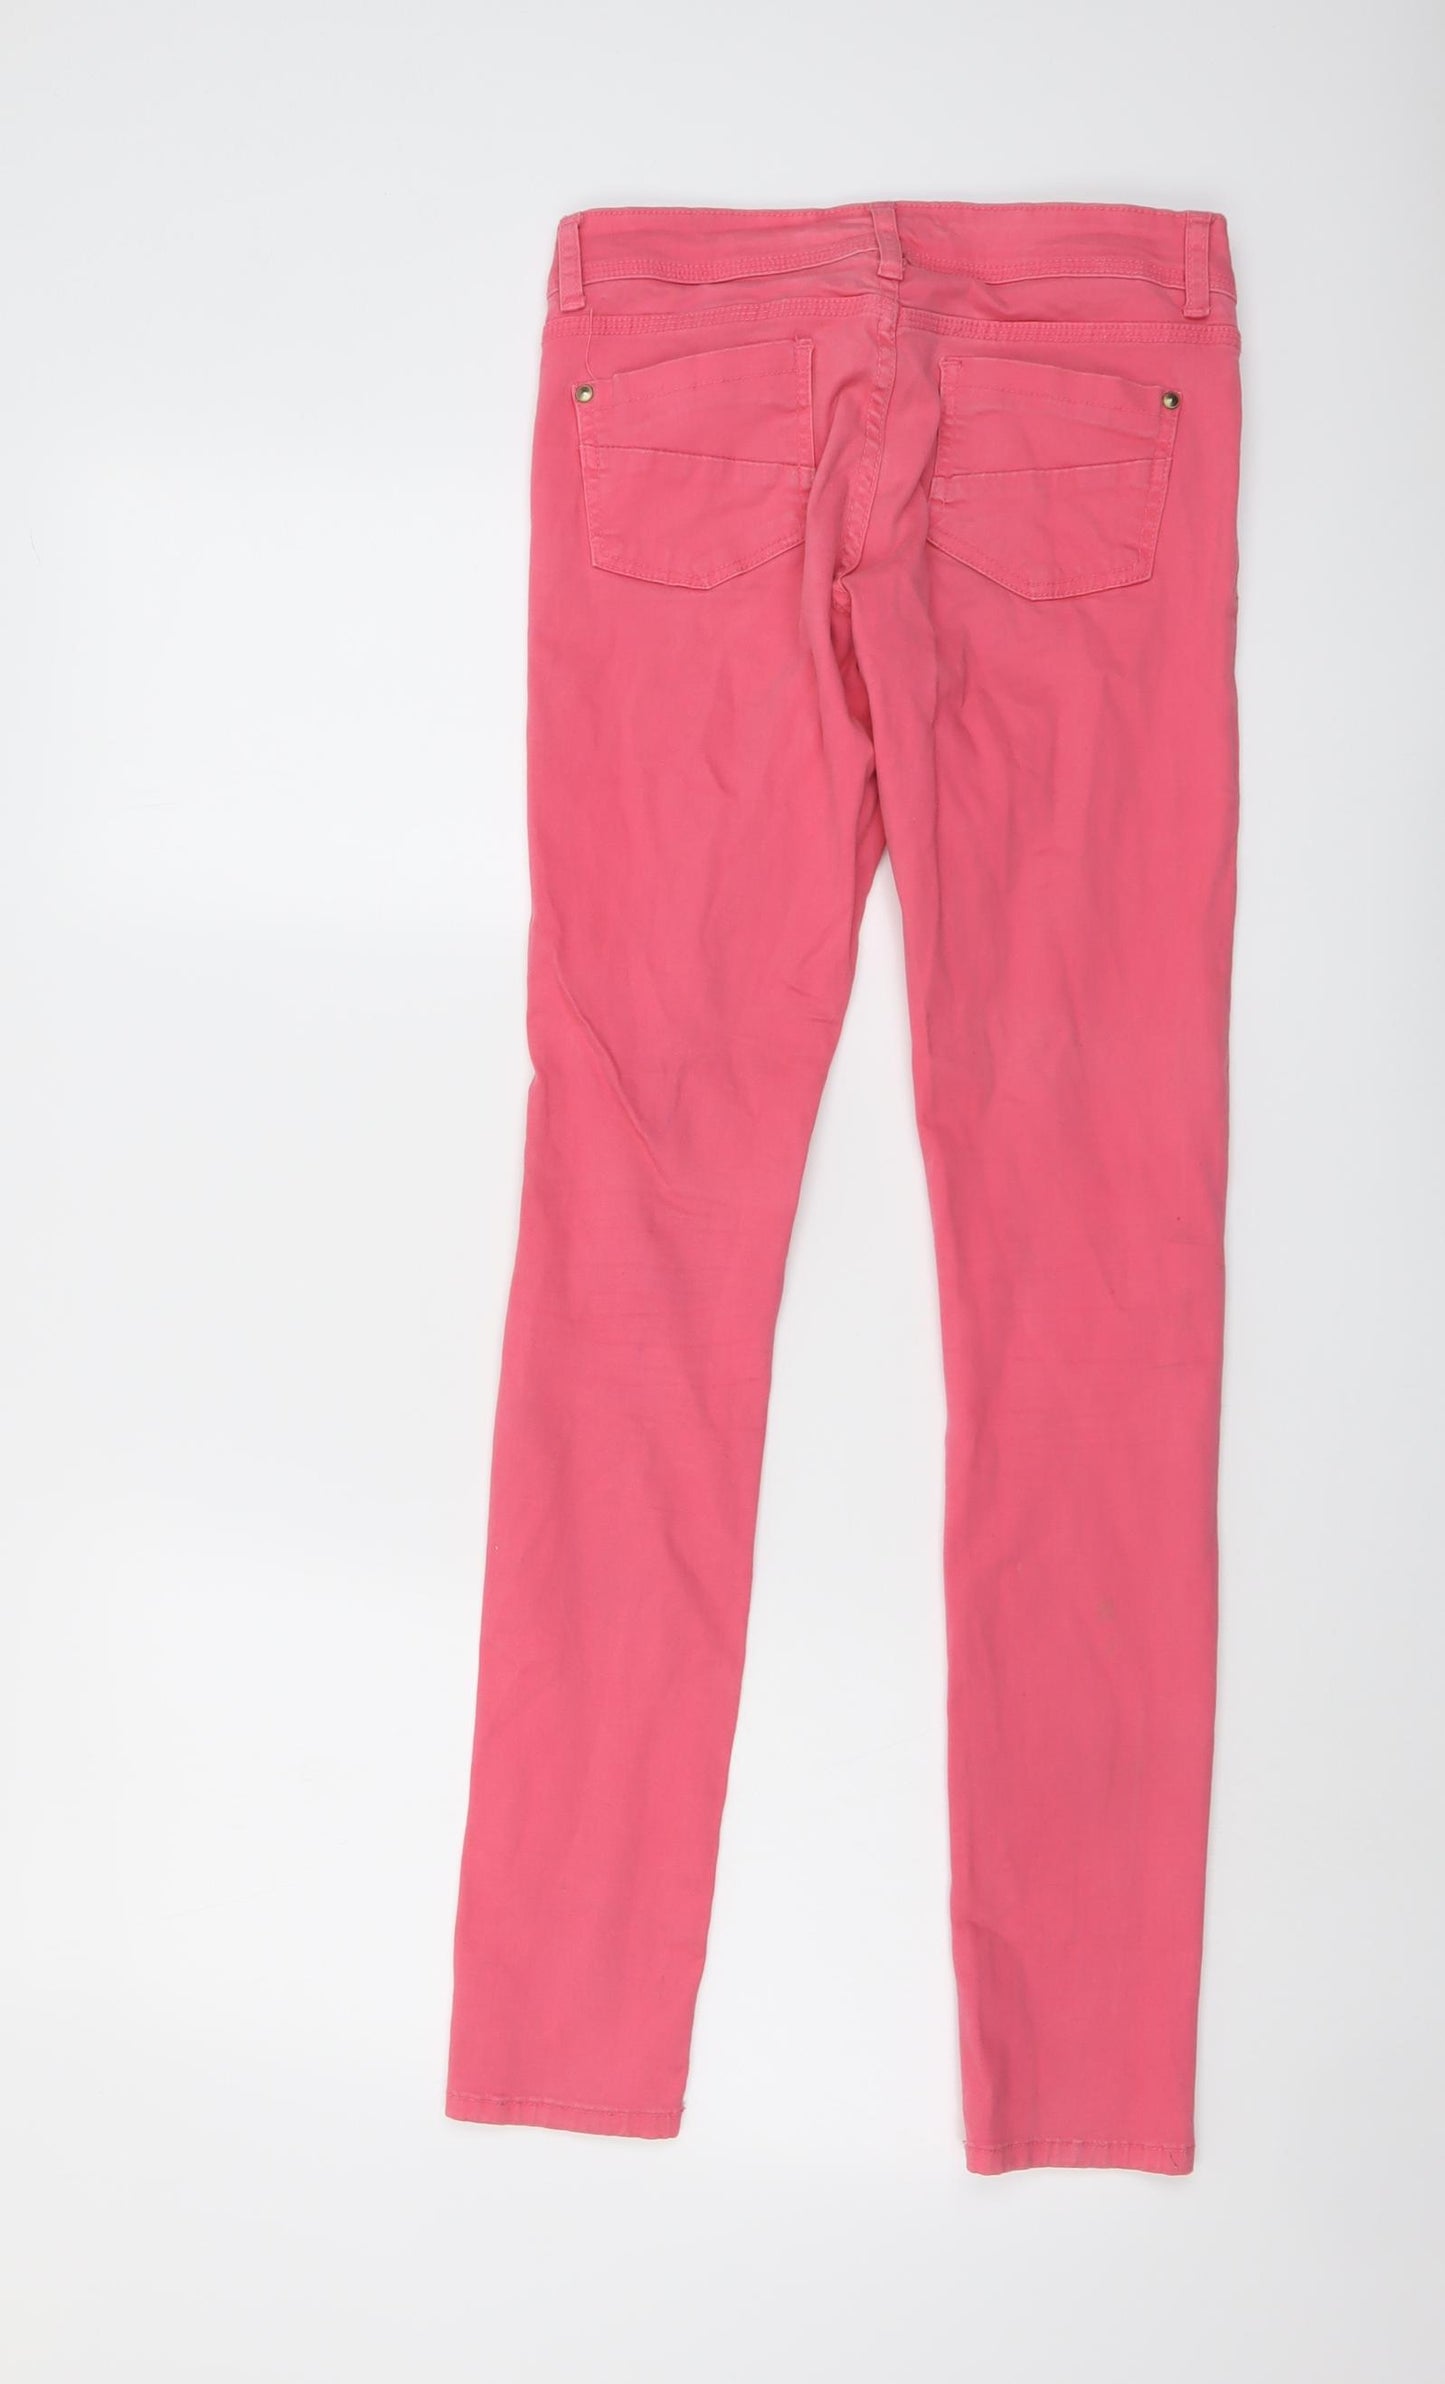 Denim & Co. Womens Pink Cotton Skinny Jeans Size 8 L30 in Regular Button